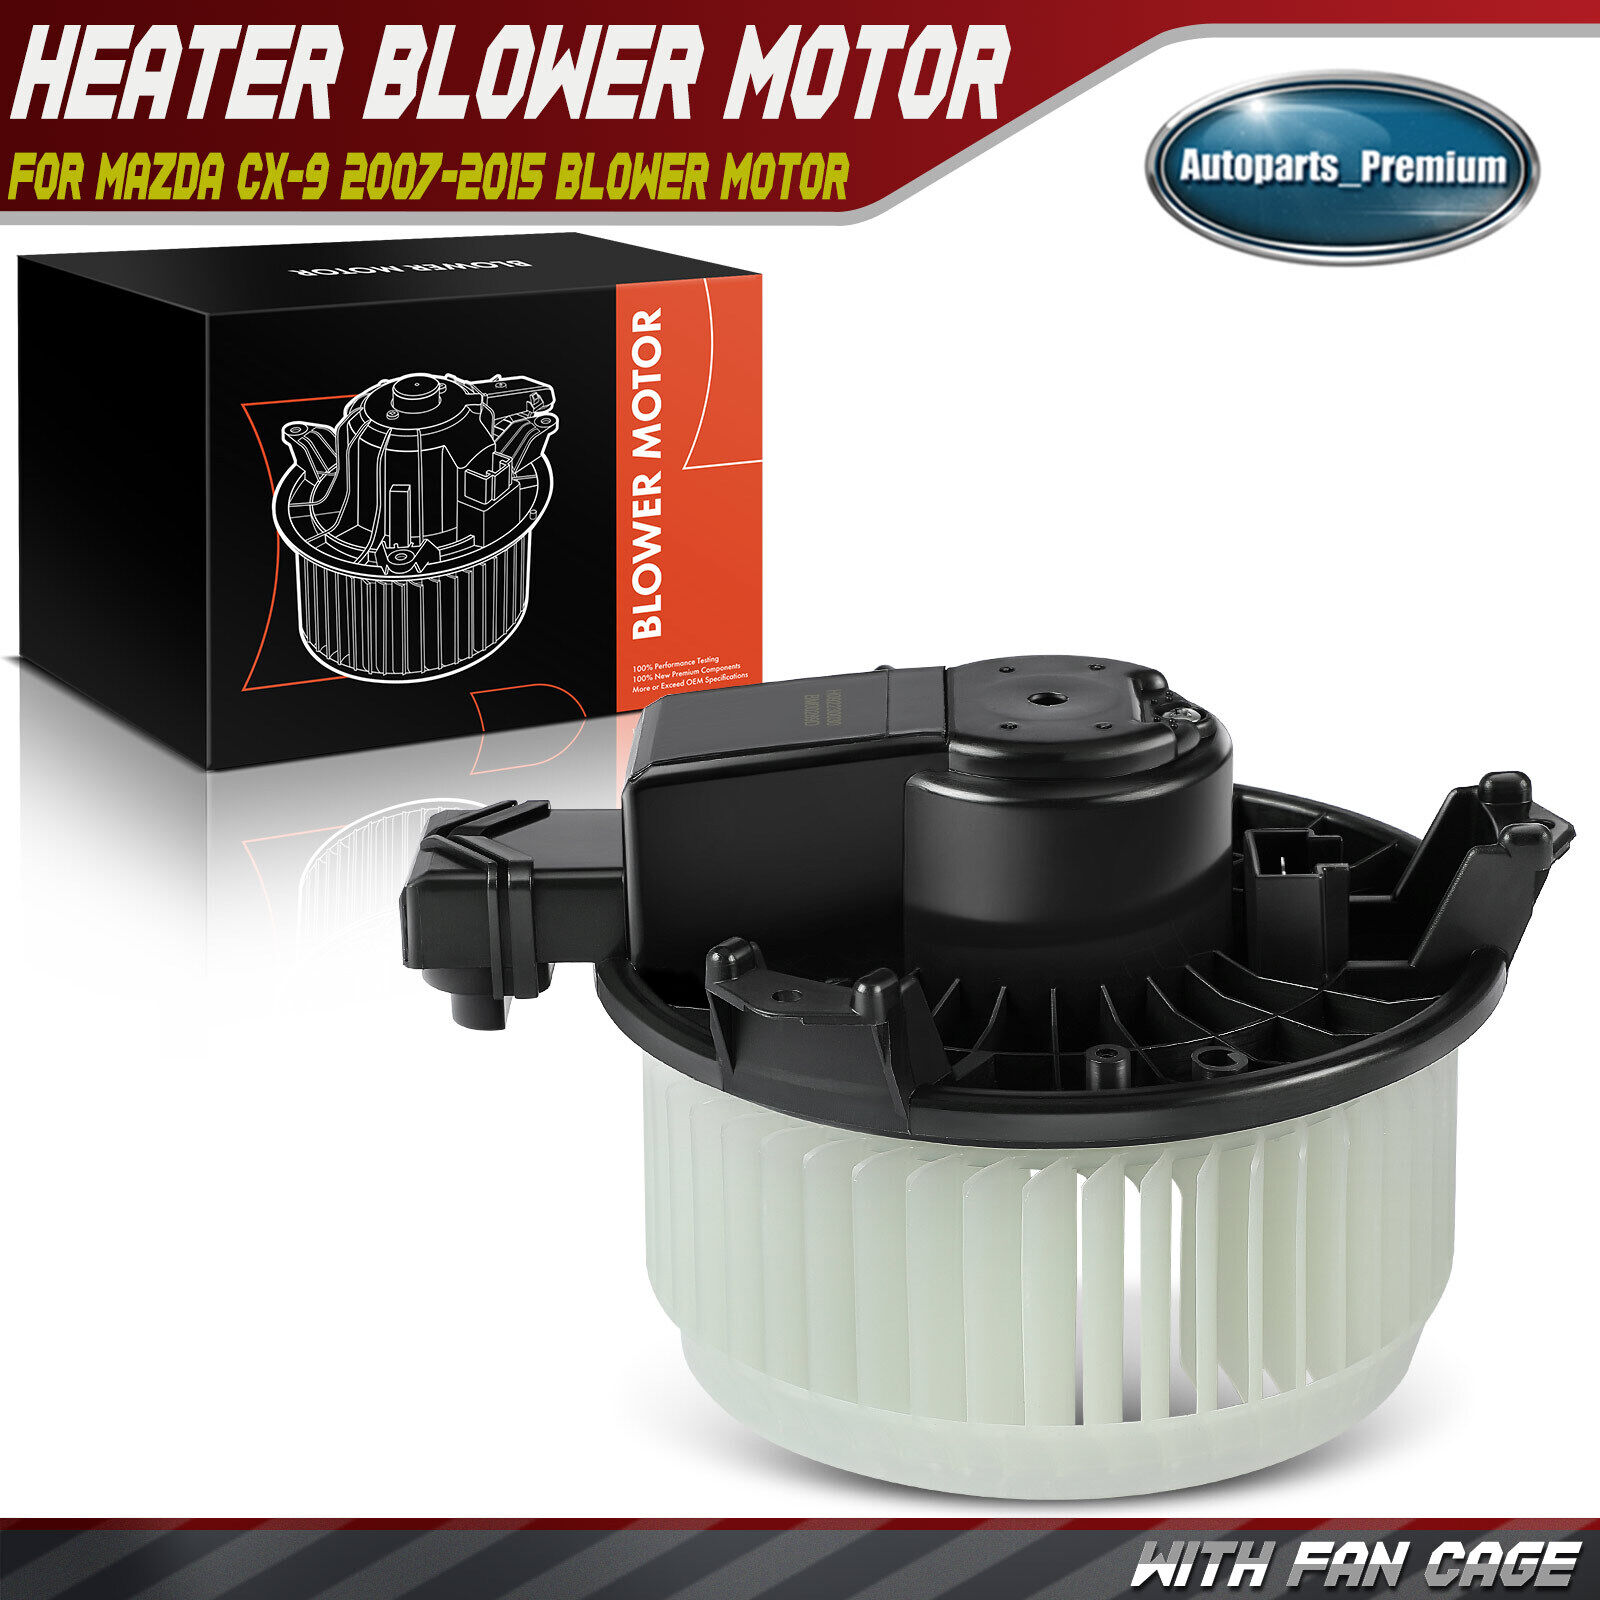 HVAC A/C Heater Blower Motor with Fan Cage for Mazda CX-9 2007-2015 TD1161B10